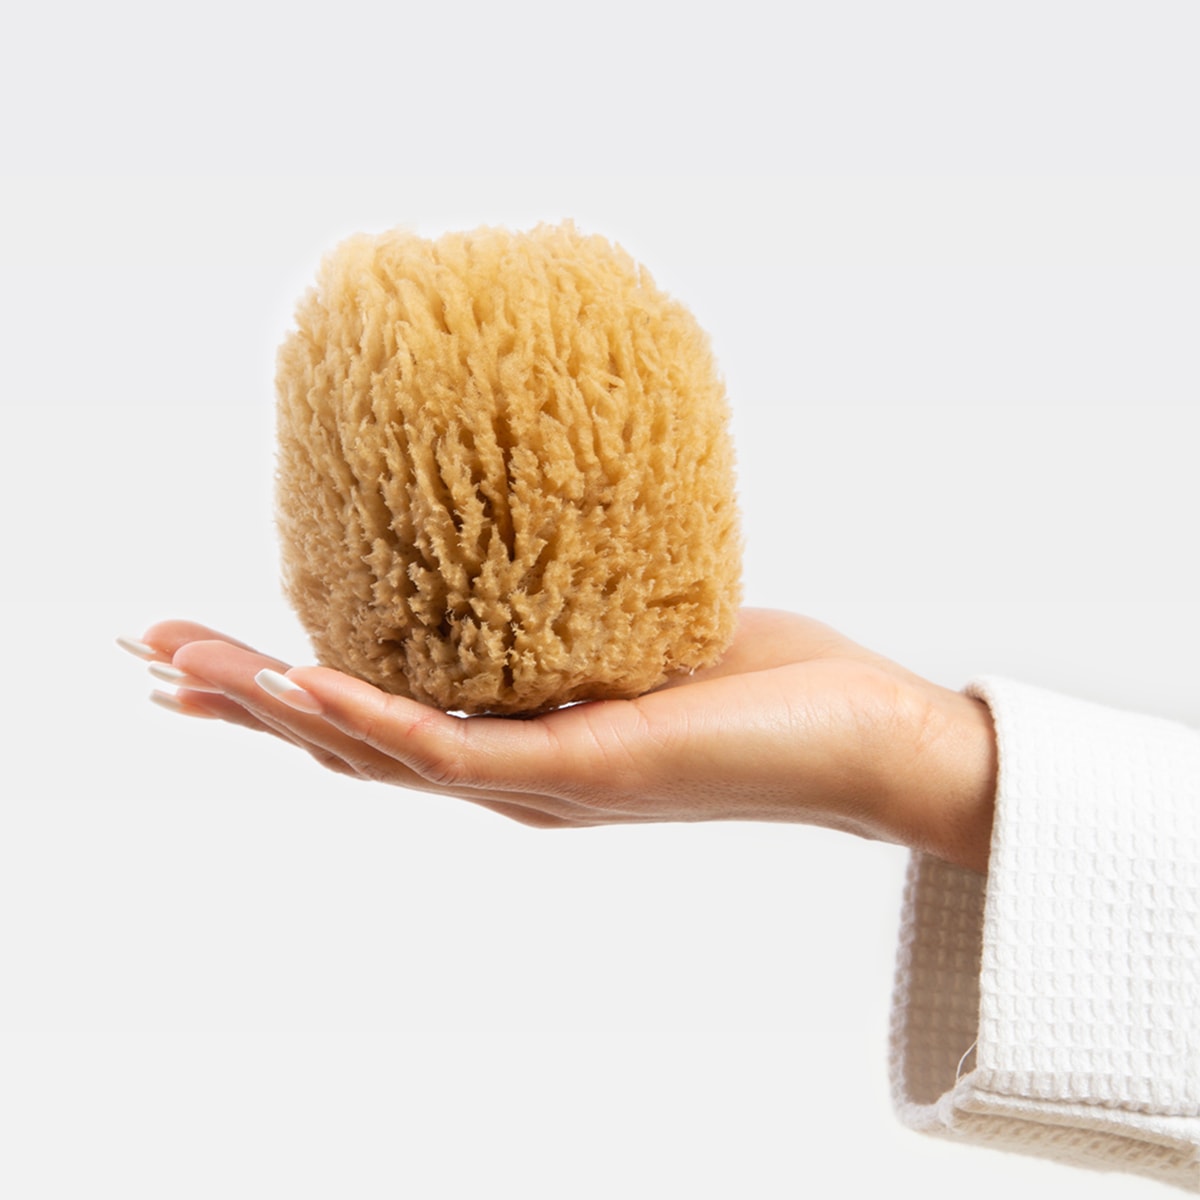 Natural sea sponge exfoliate in the hand of a model with just the hand and sponge showing